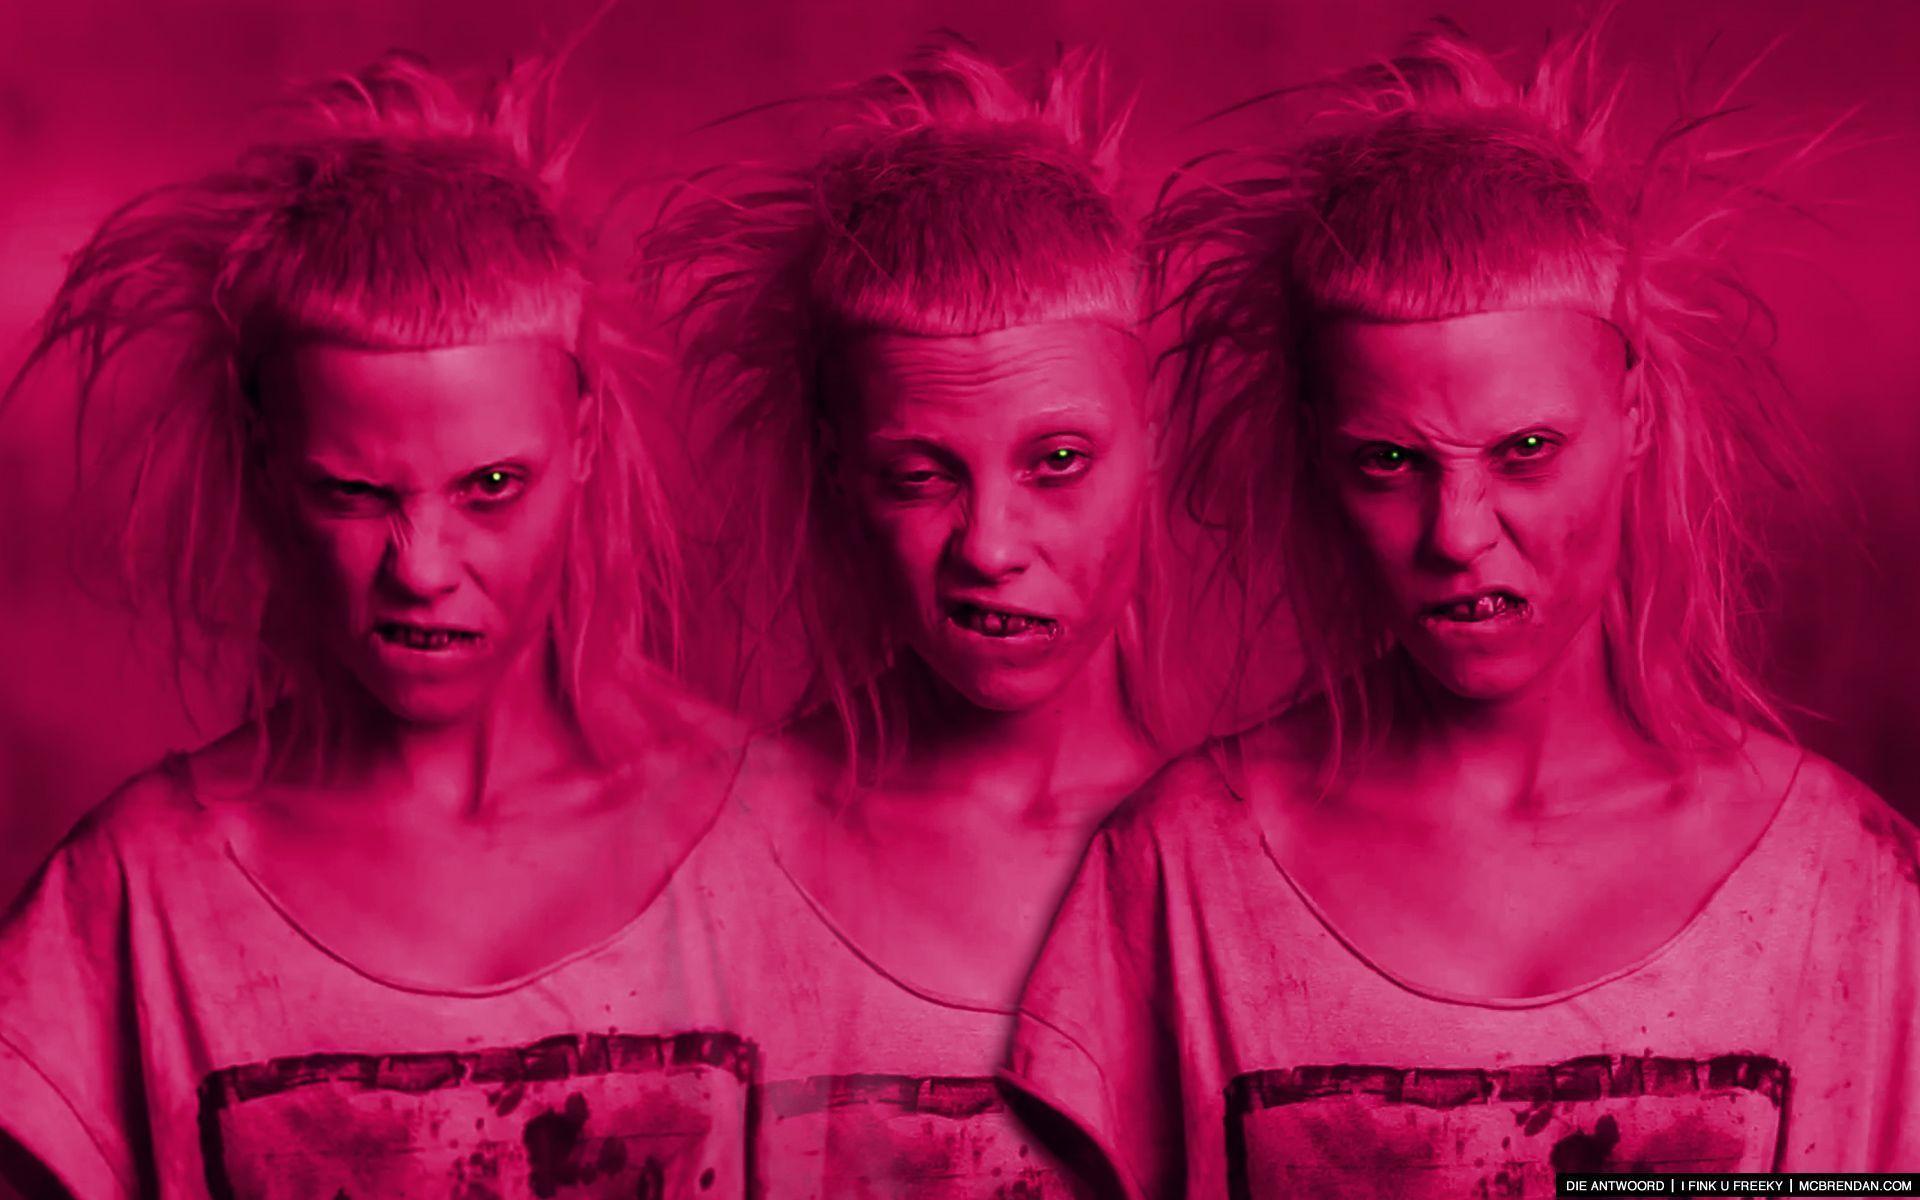 die antwoord wallpaper - Image And Wallpaper free to